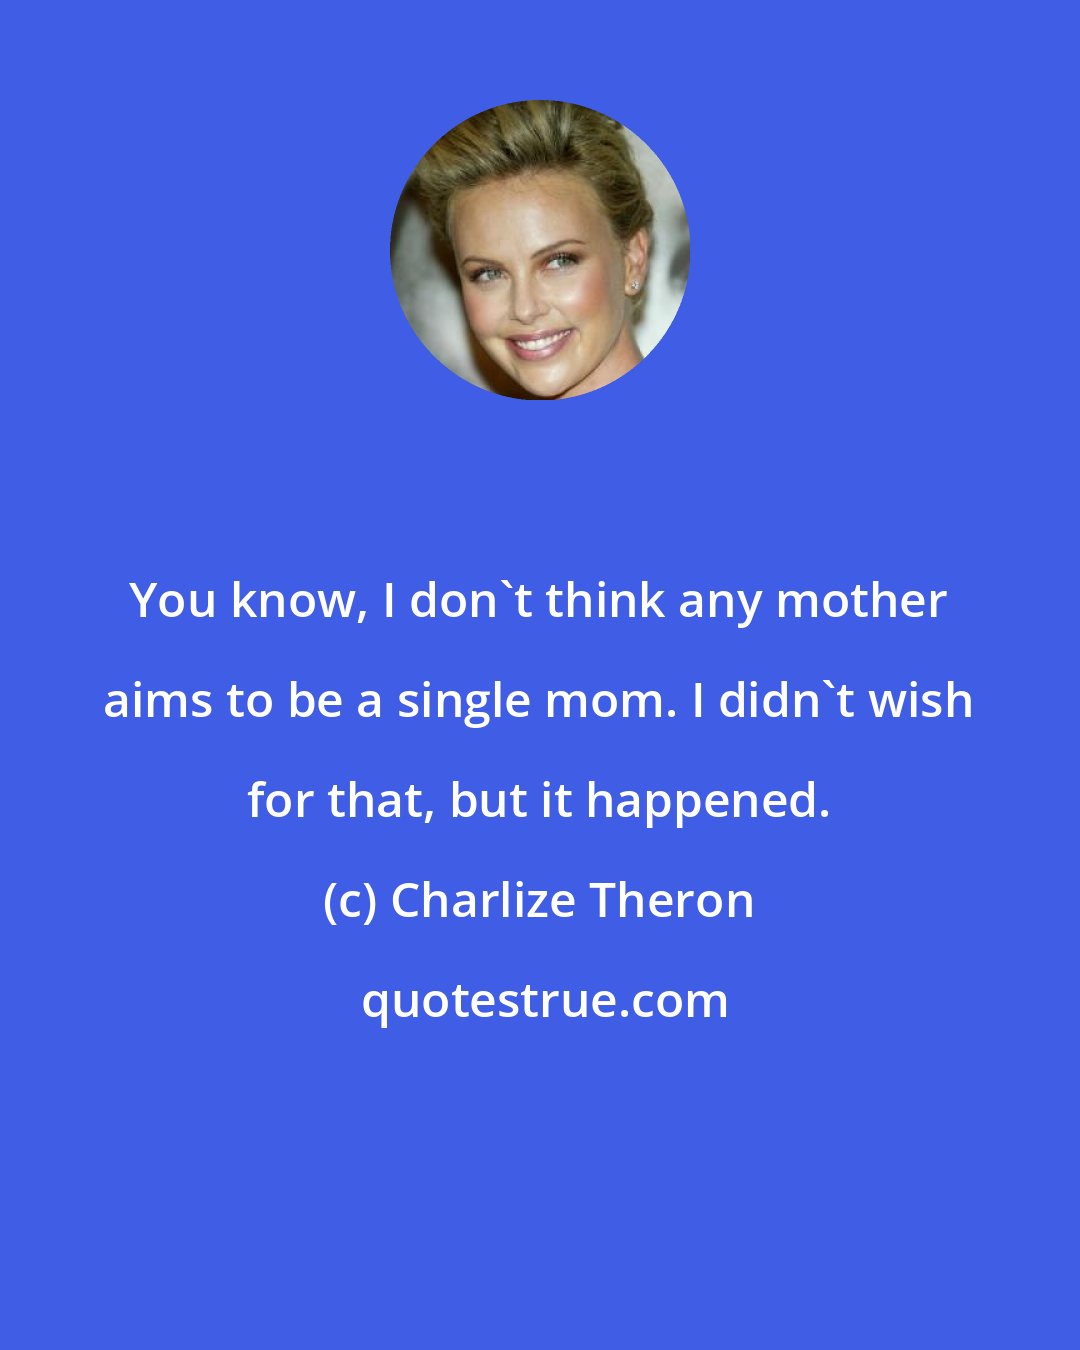 Charlize Theron: You know, I don't think any mother aims to be a single mom. I didn't wish for that, but it happened.